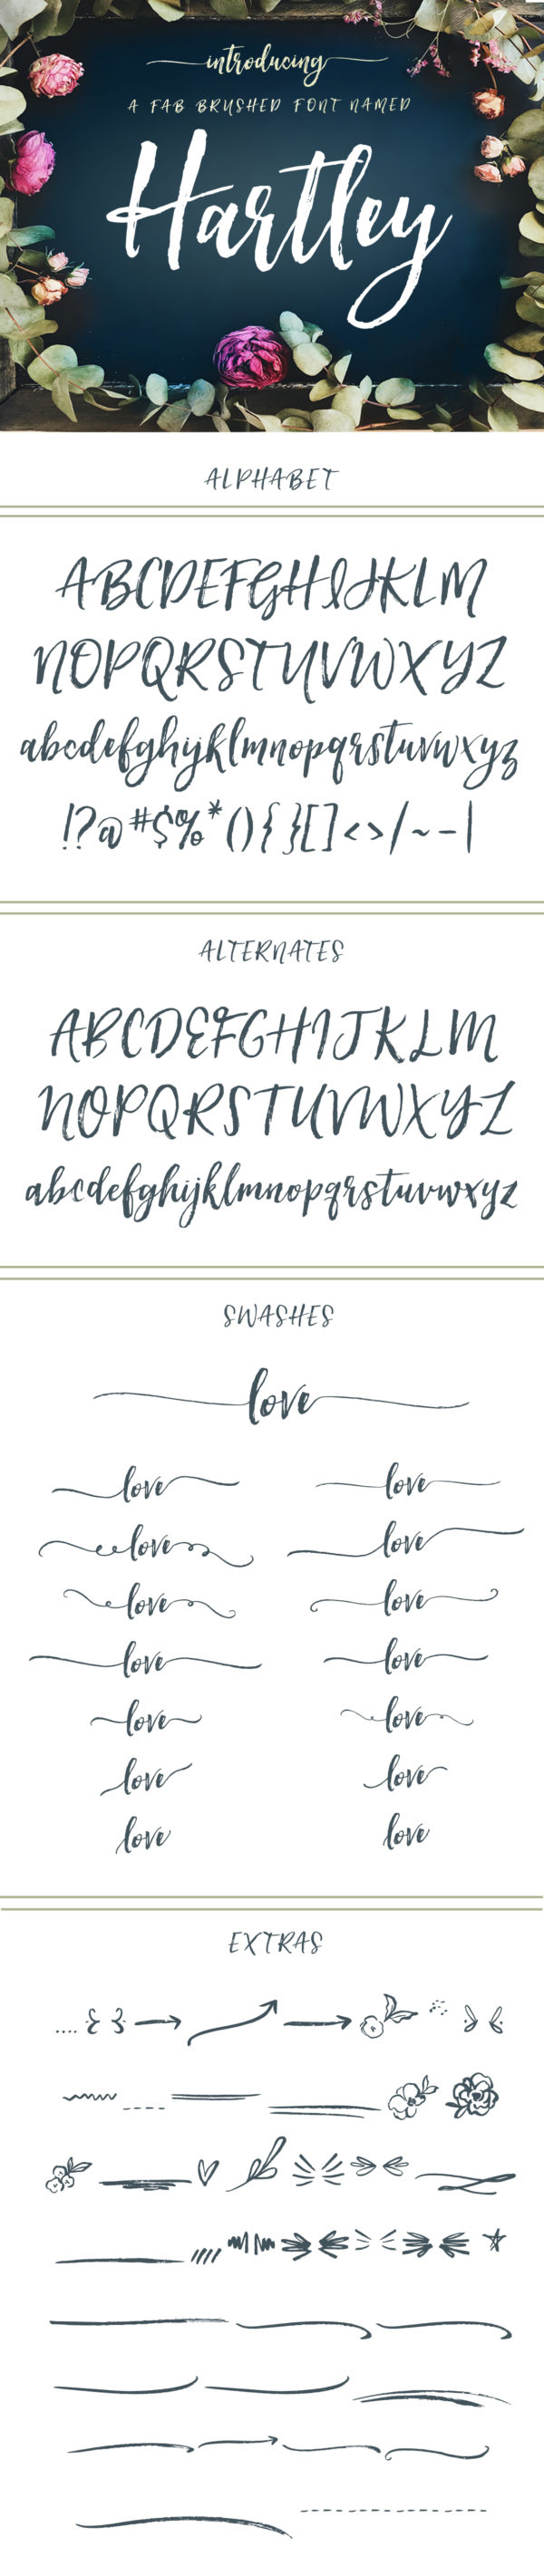 Hand Brushed Calligraphy Font With Realistic Brush Texture | angiemakes.com